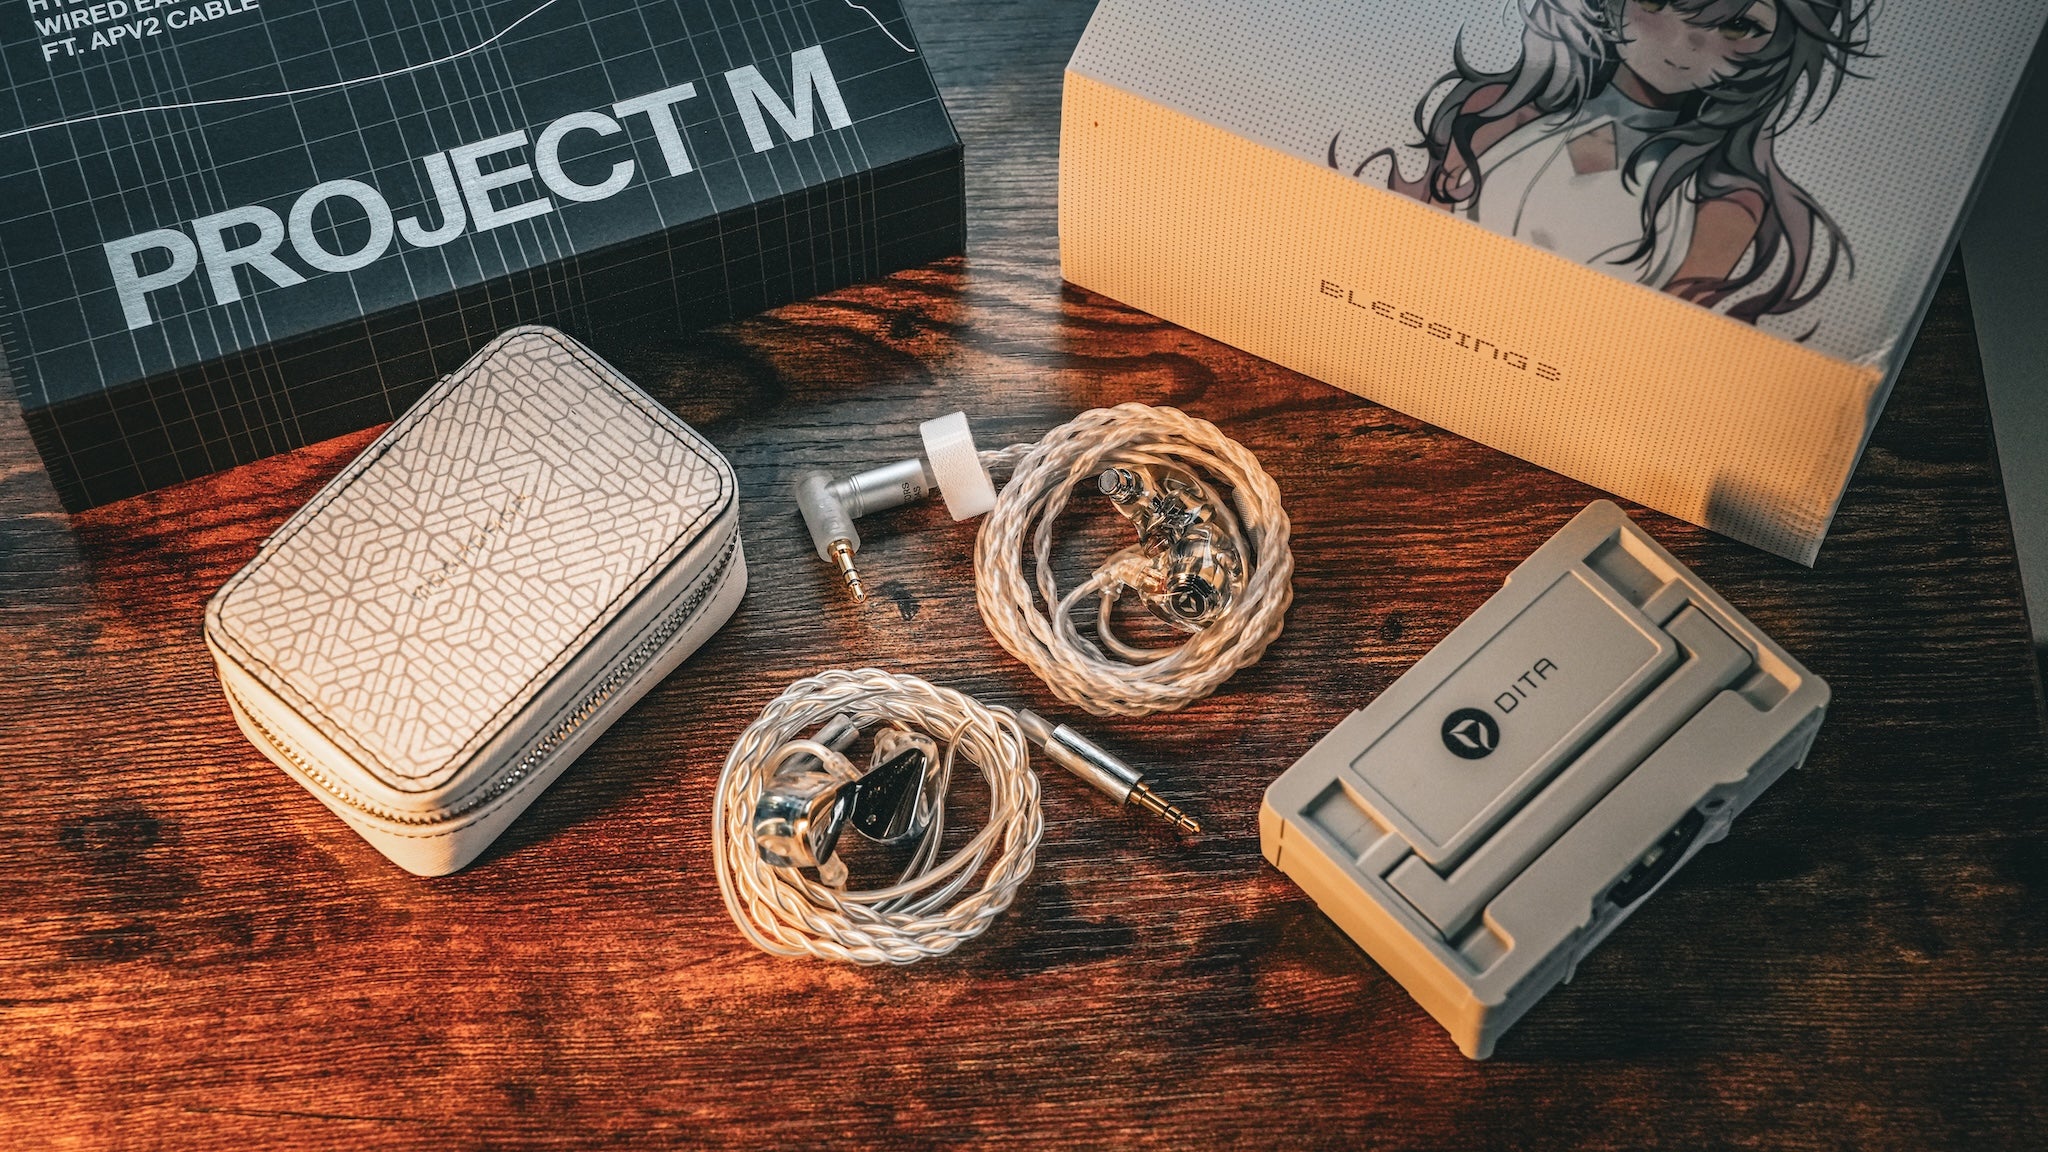 DITA Audio Project M and Moondrop Blessing 3 with associated accessories and packaging over wood backdrop